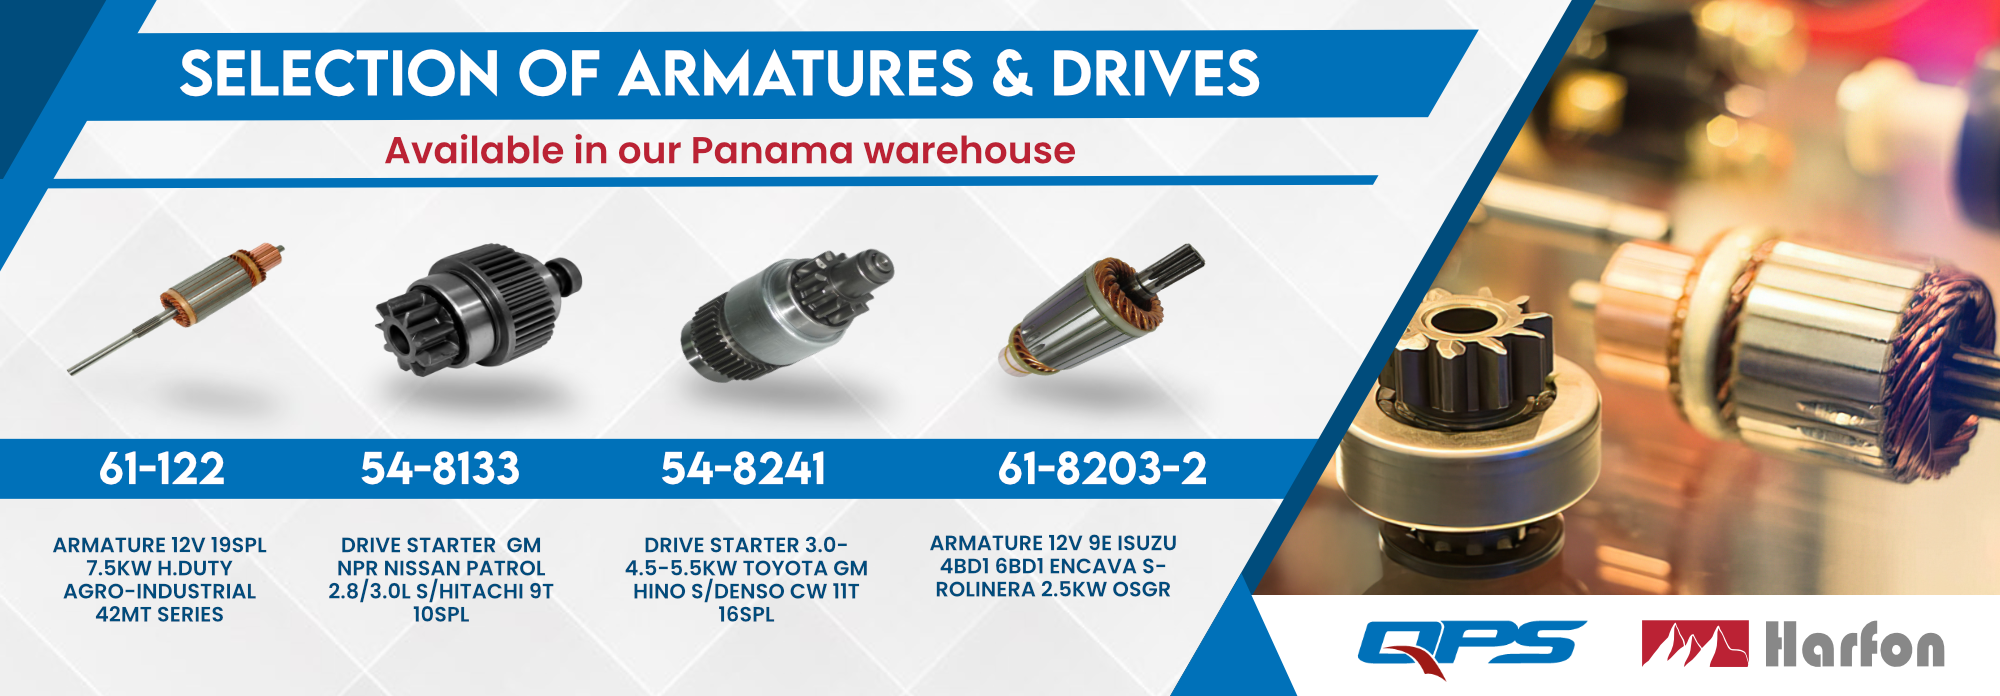 Selection of armatures & drives